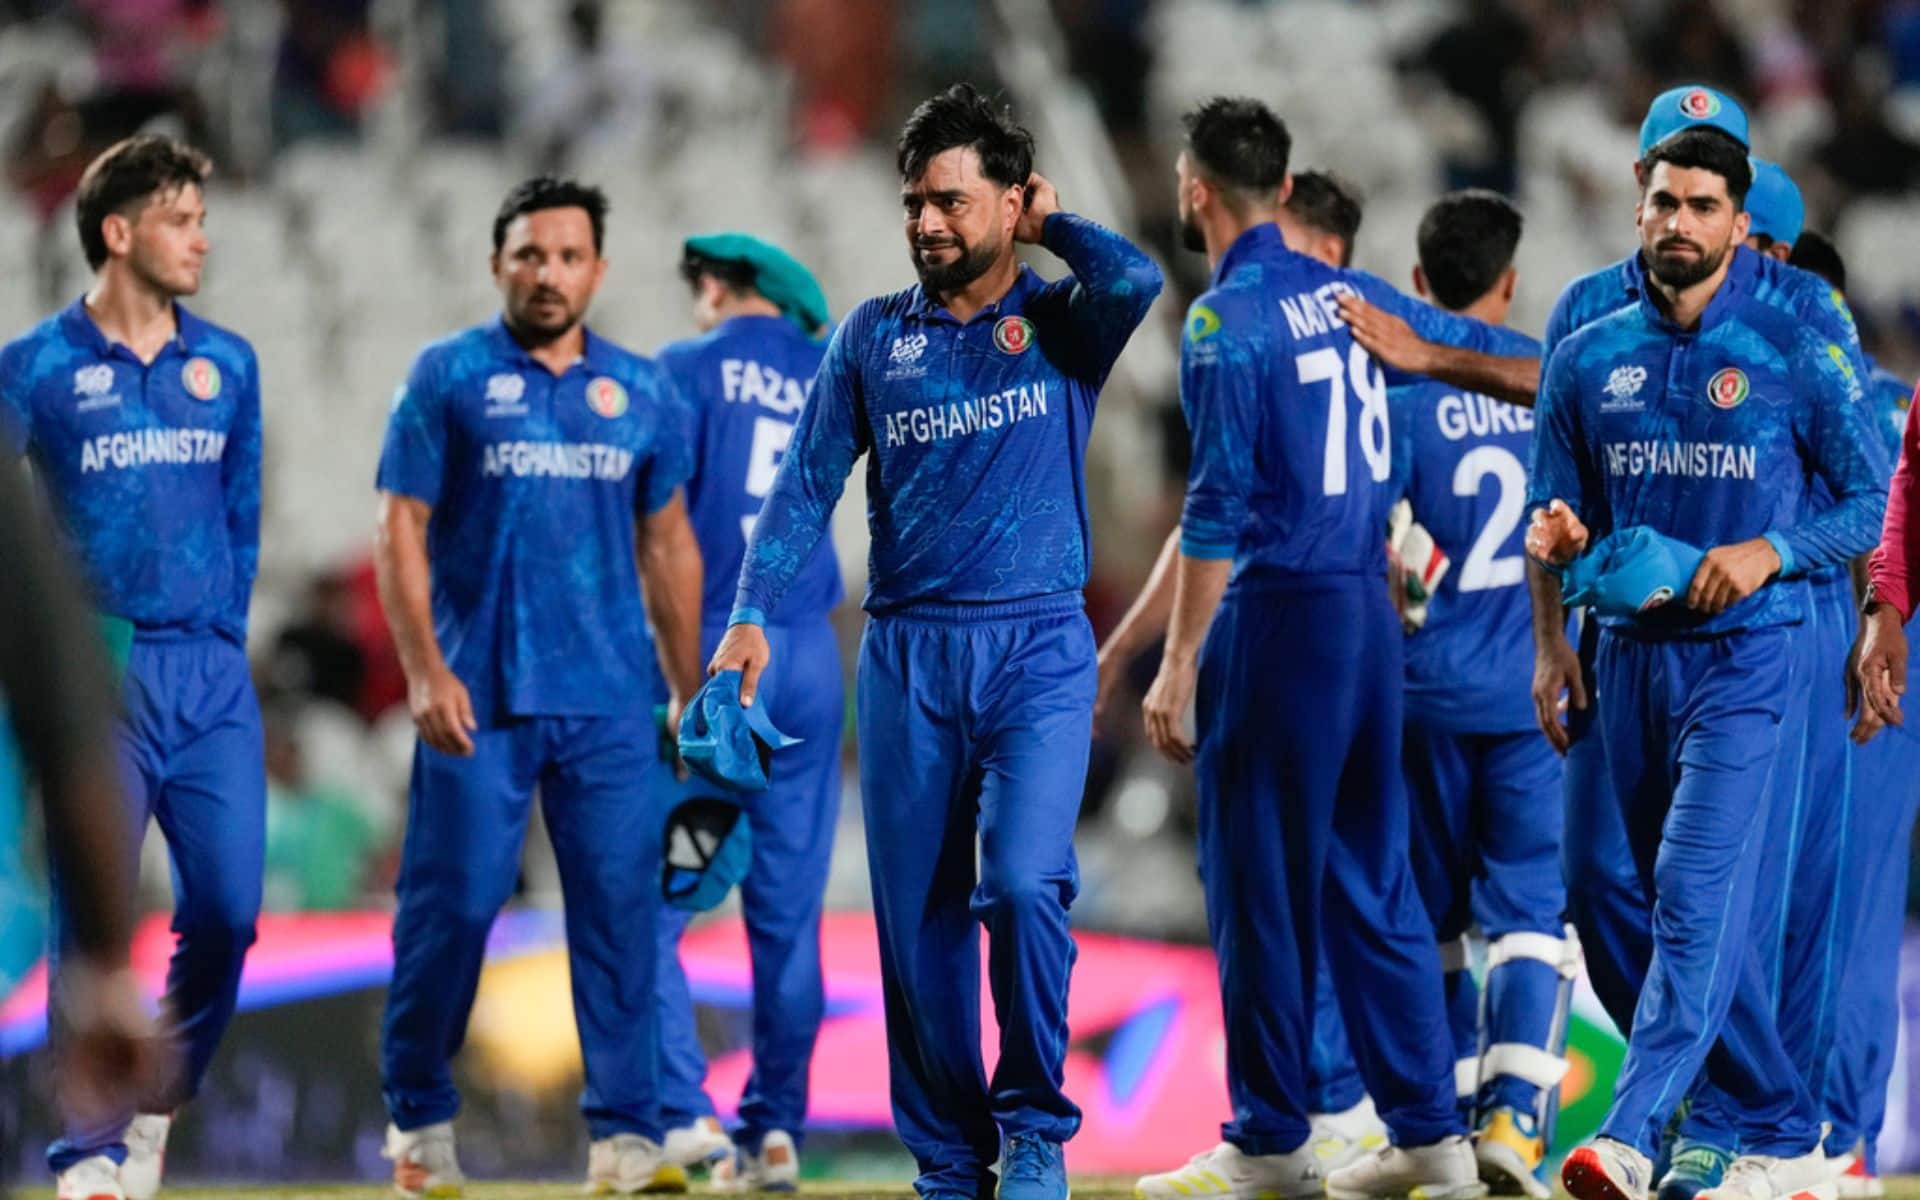 'The Fight Put...': Rashid Khan's Special Message For His Team And Afghanistan Fans